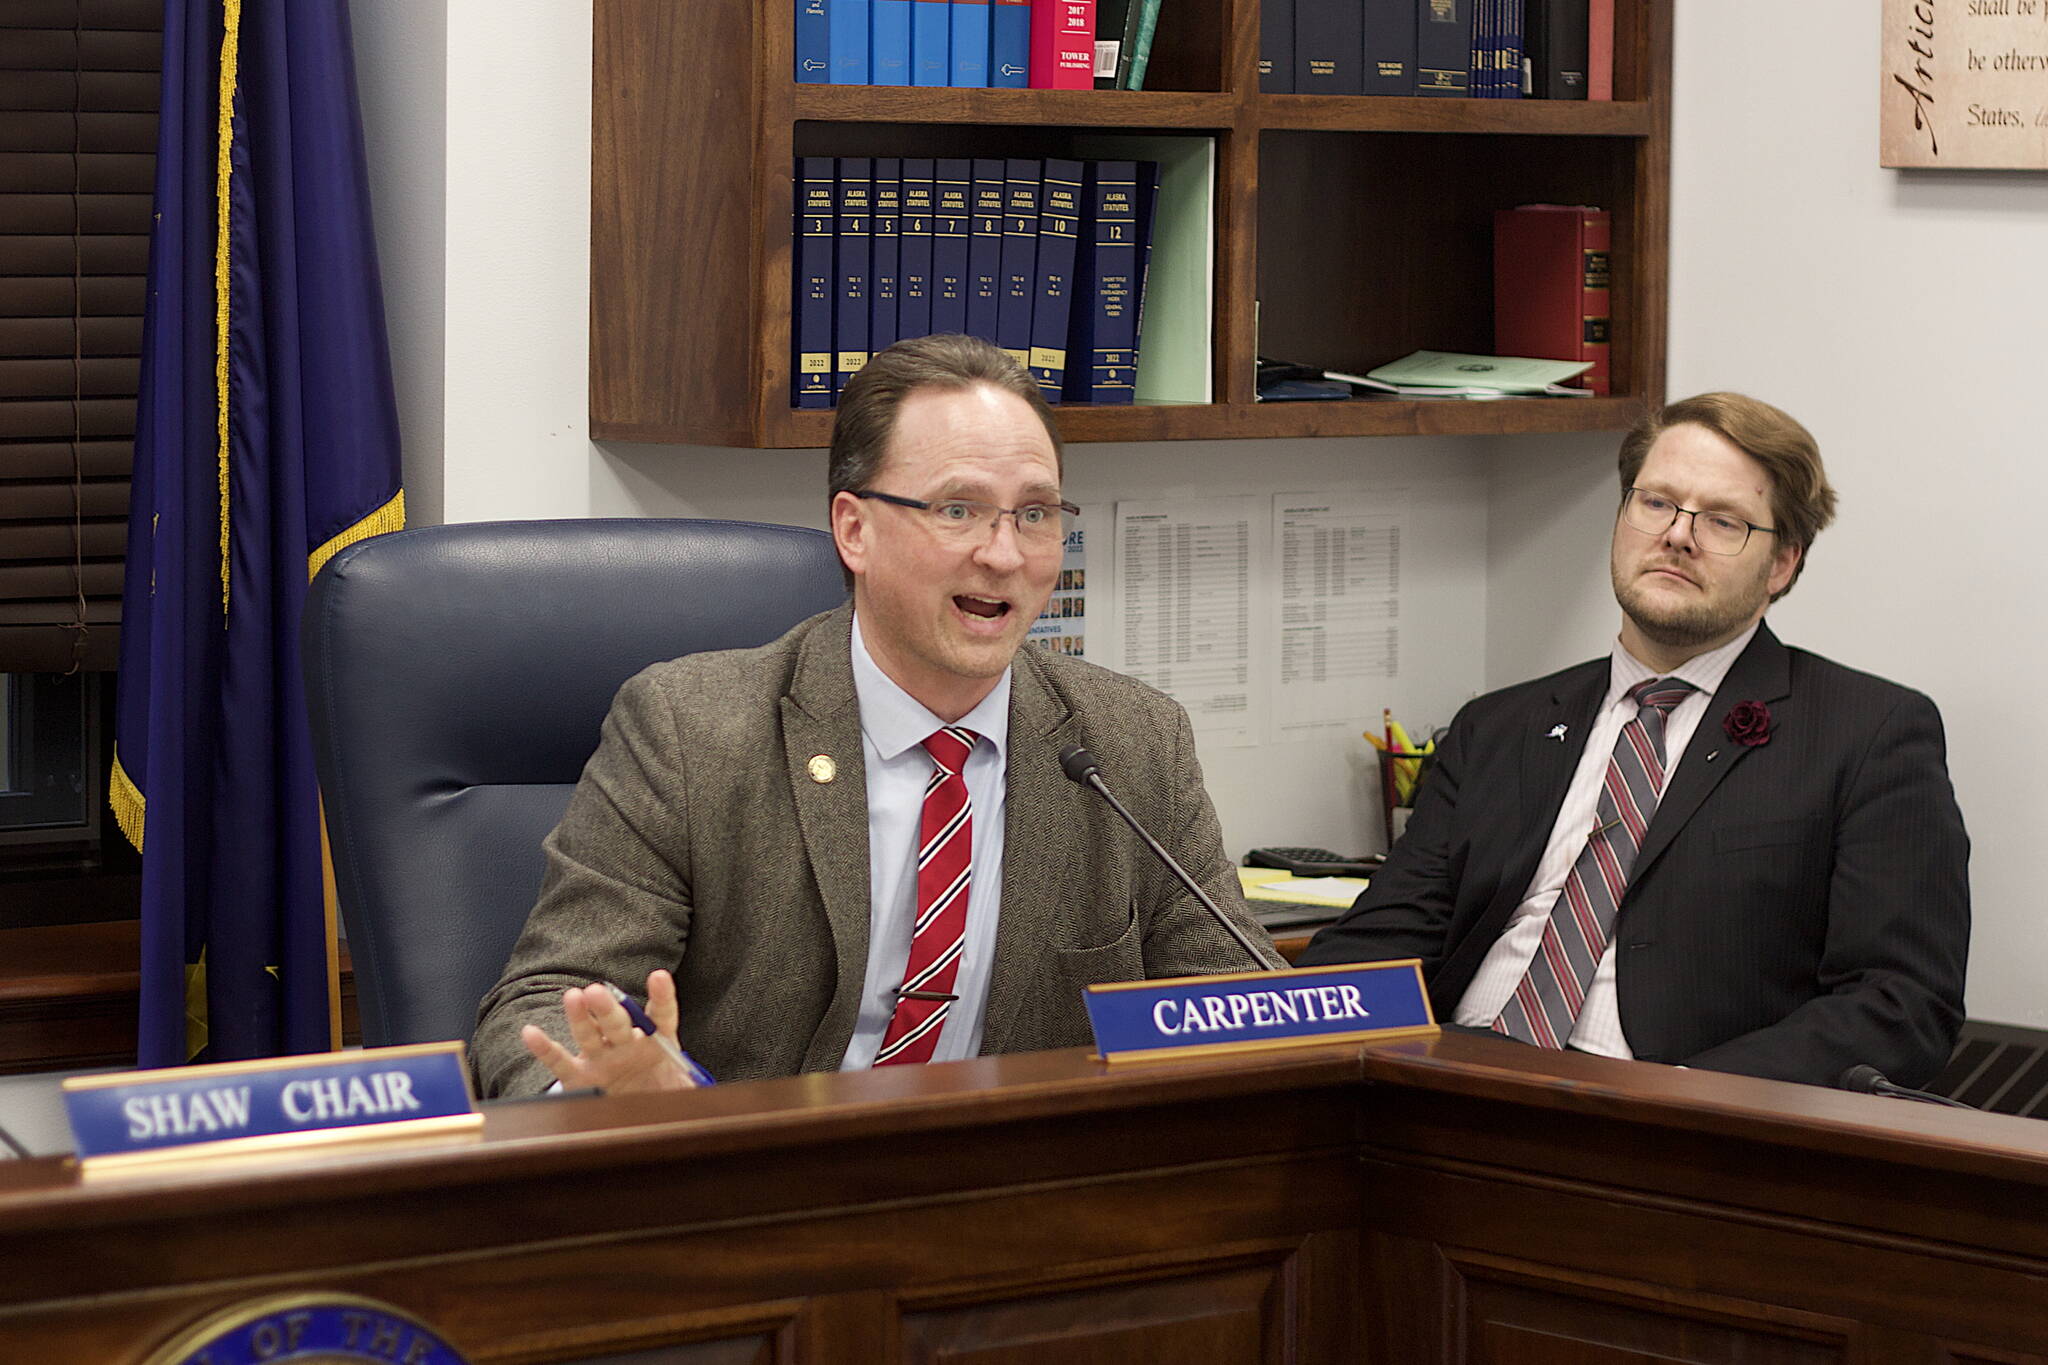 State Rep. Ben Carpenter, R-Nikiski, inquires about election legislation during a committee hearing Tuesday at the Alaska State Capitol. Carpenter, chair of the House Ways and Means Committee, is sponsoring bills to decrease business taxes and implement a 2% statewide sales tax that were heard. (Mark Sabbatini / Juneau Empire)